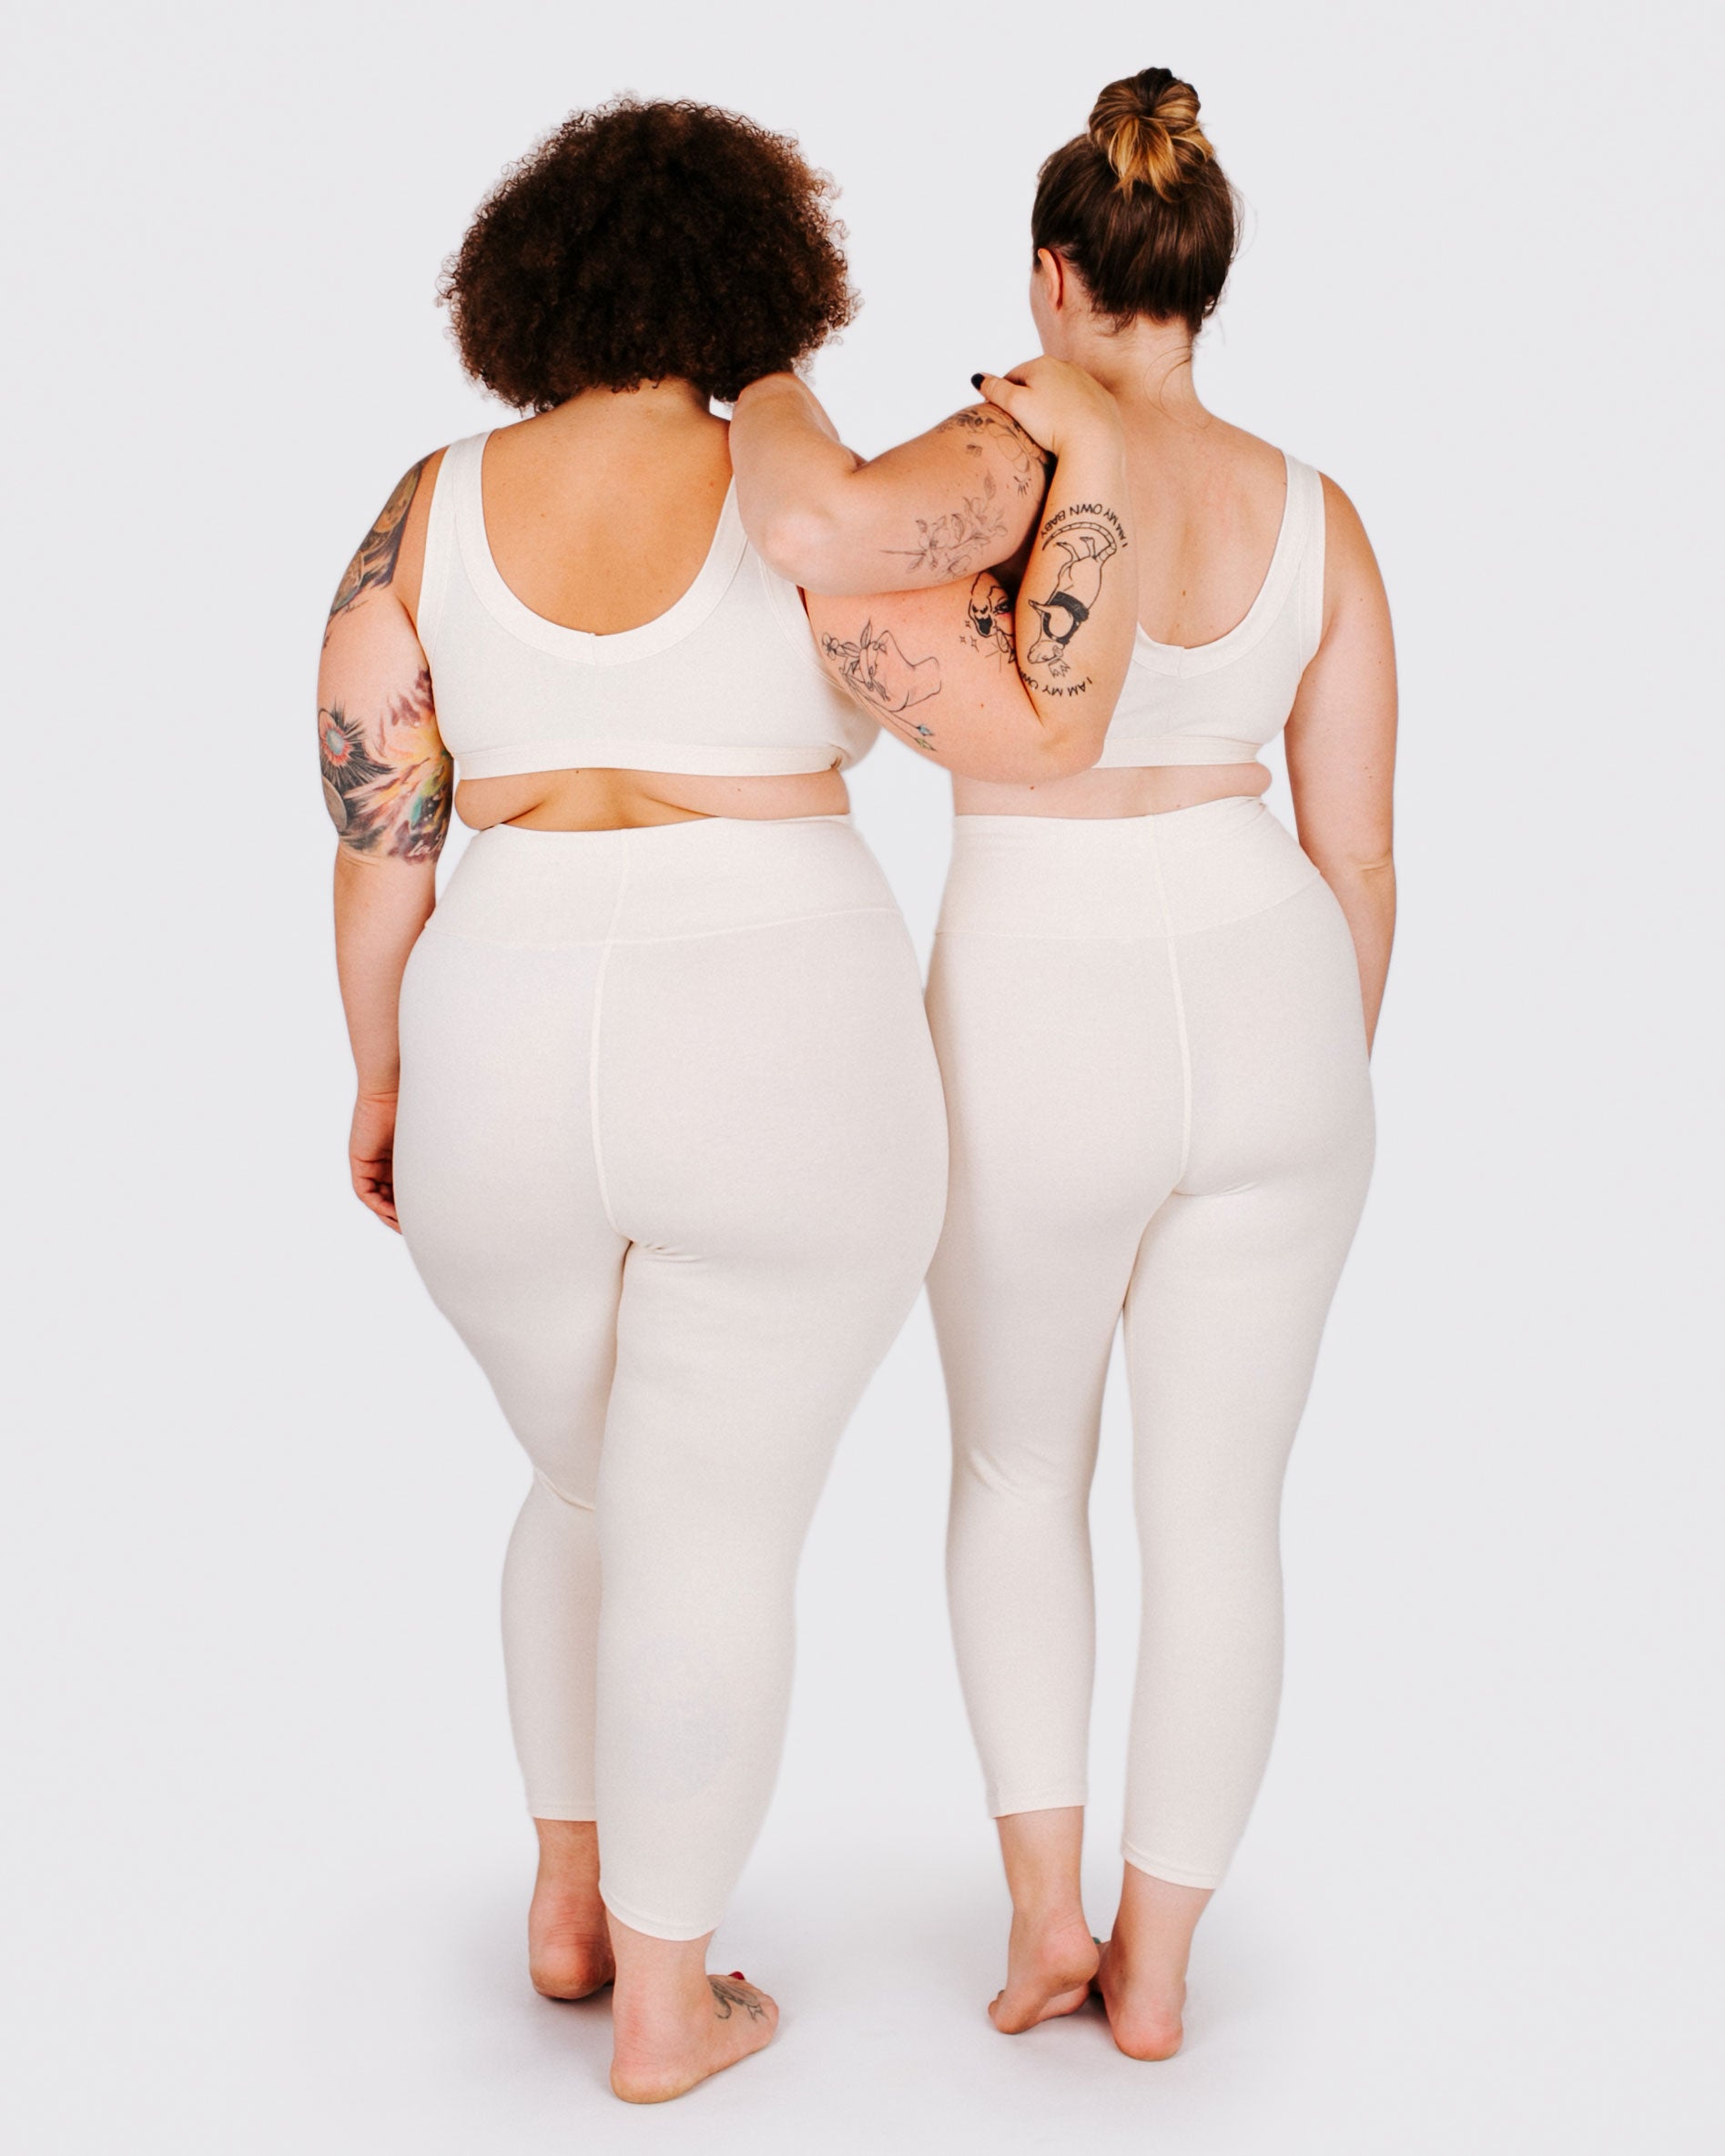 Fit photo from the back of Thunderpants organic cotton 3/4 Length Leggings and Bralettes in off-white on two model standing together.